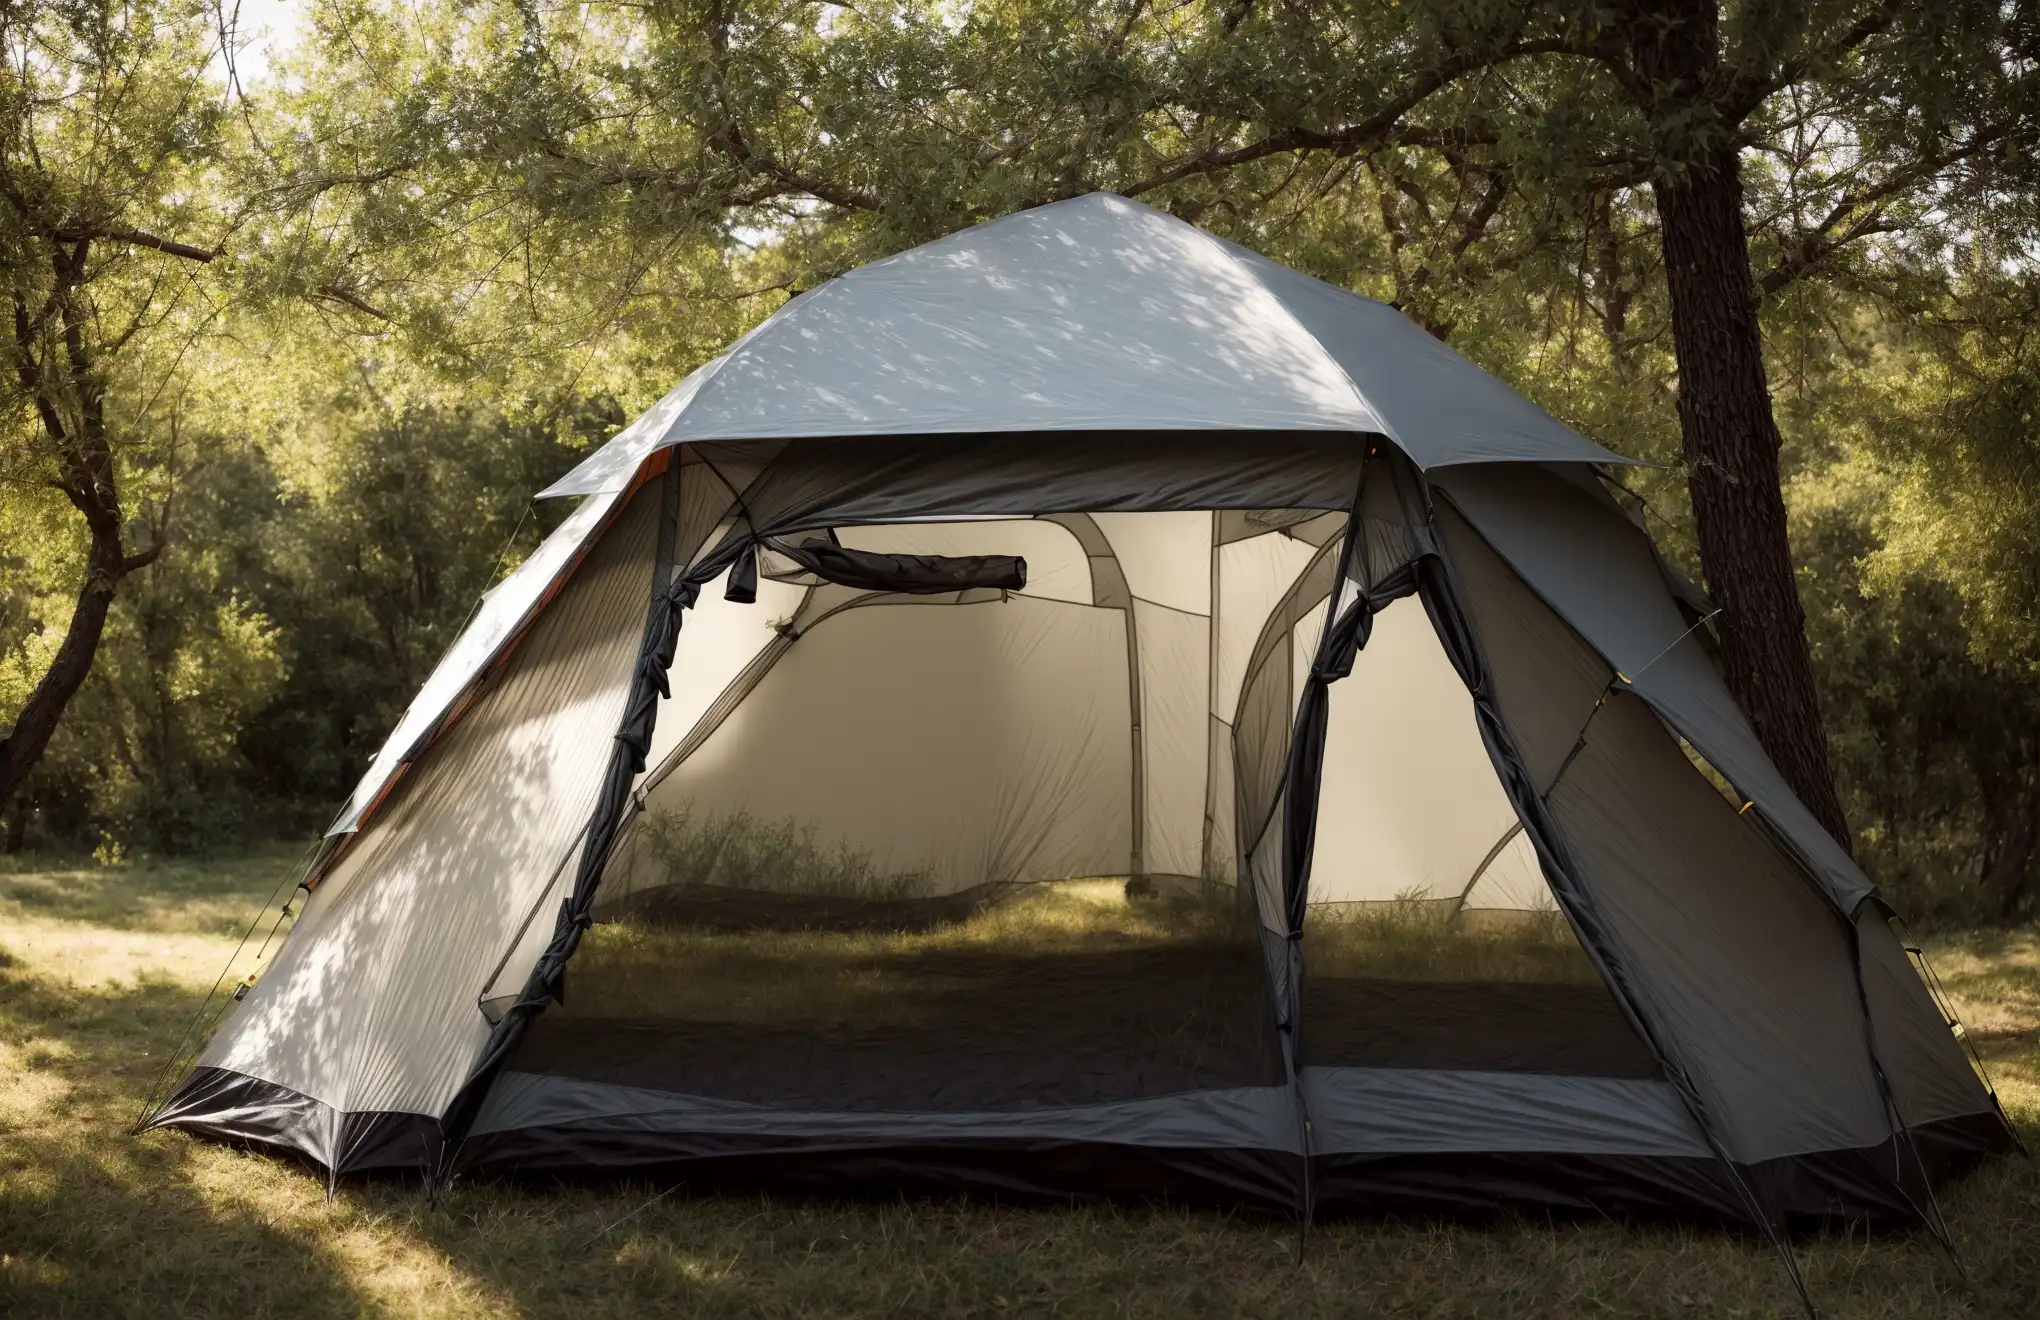 a tent ingeniously cooled without electricity